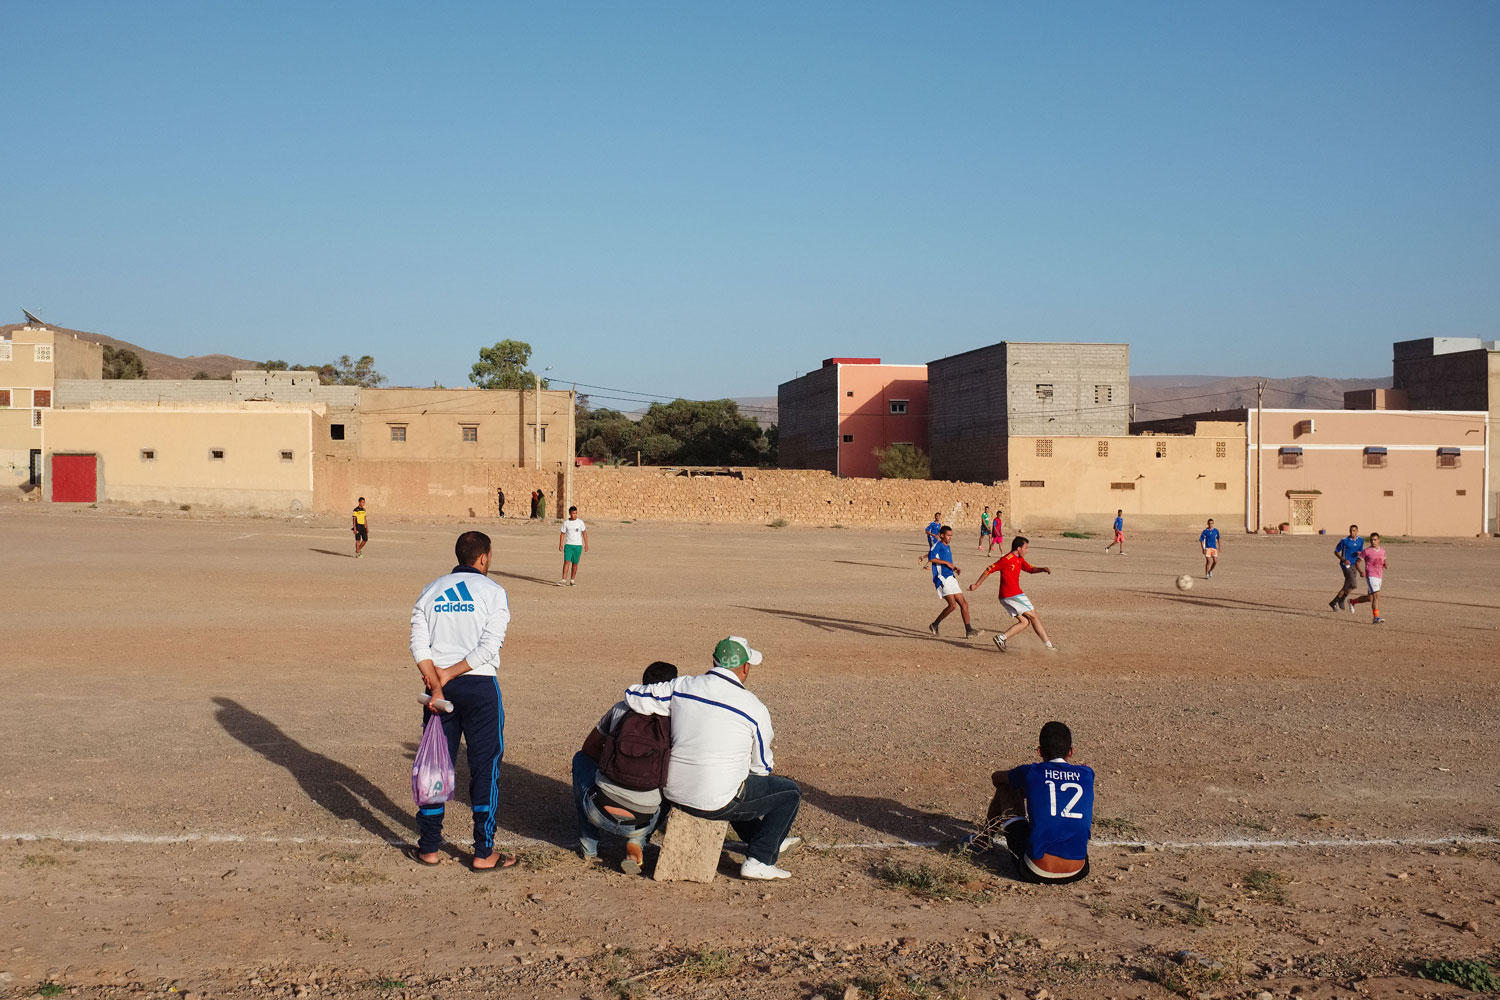 Evening footy match in Taliouine